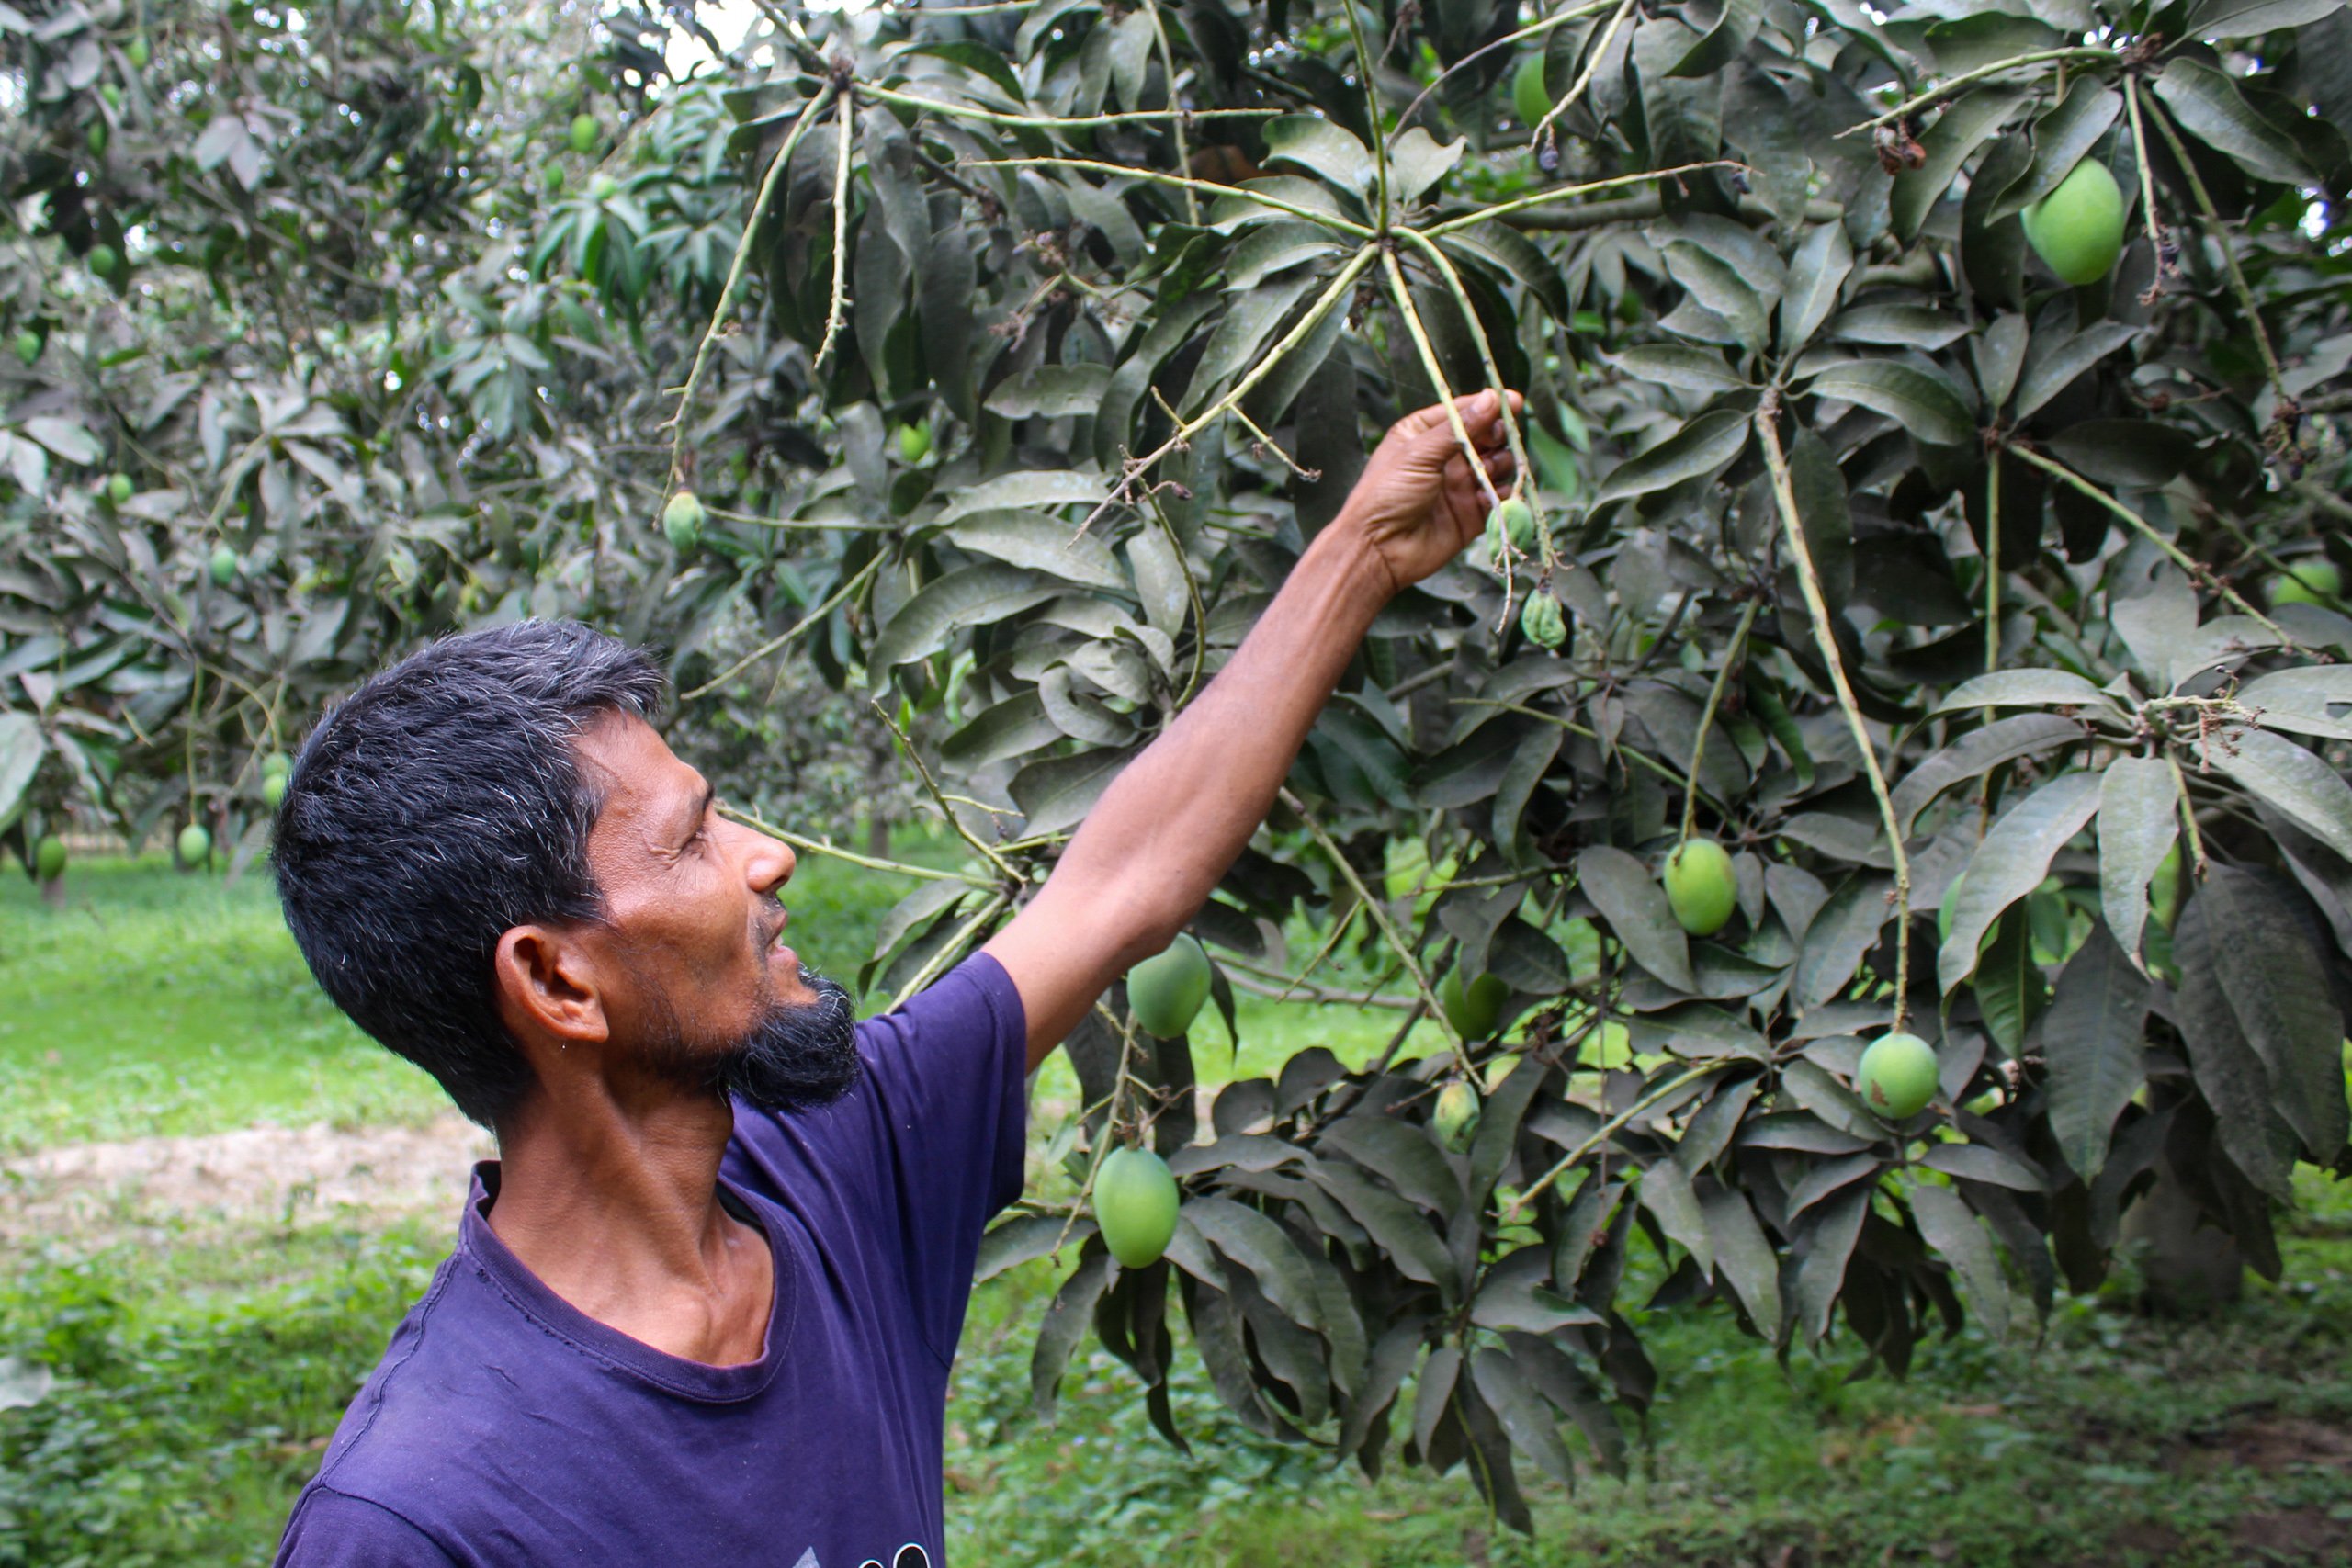 <p>Farmer Ekelakh Hossain examines baby mangoes that have started to dry up on one of his trees due to the extreme heatwave (Image: Rafiqul Islam)</p>